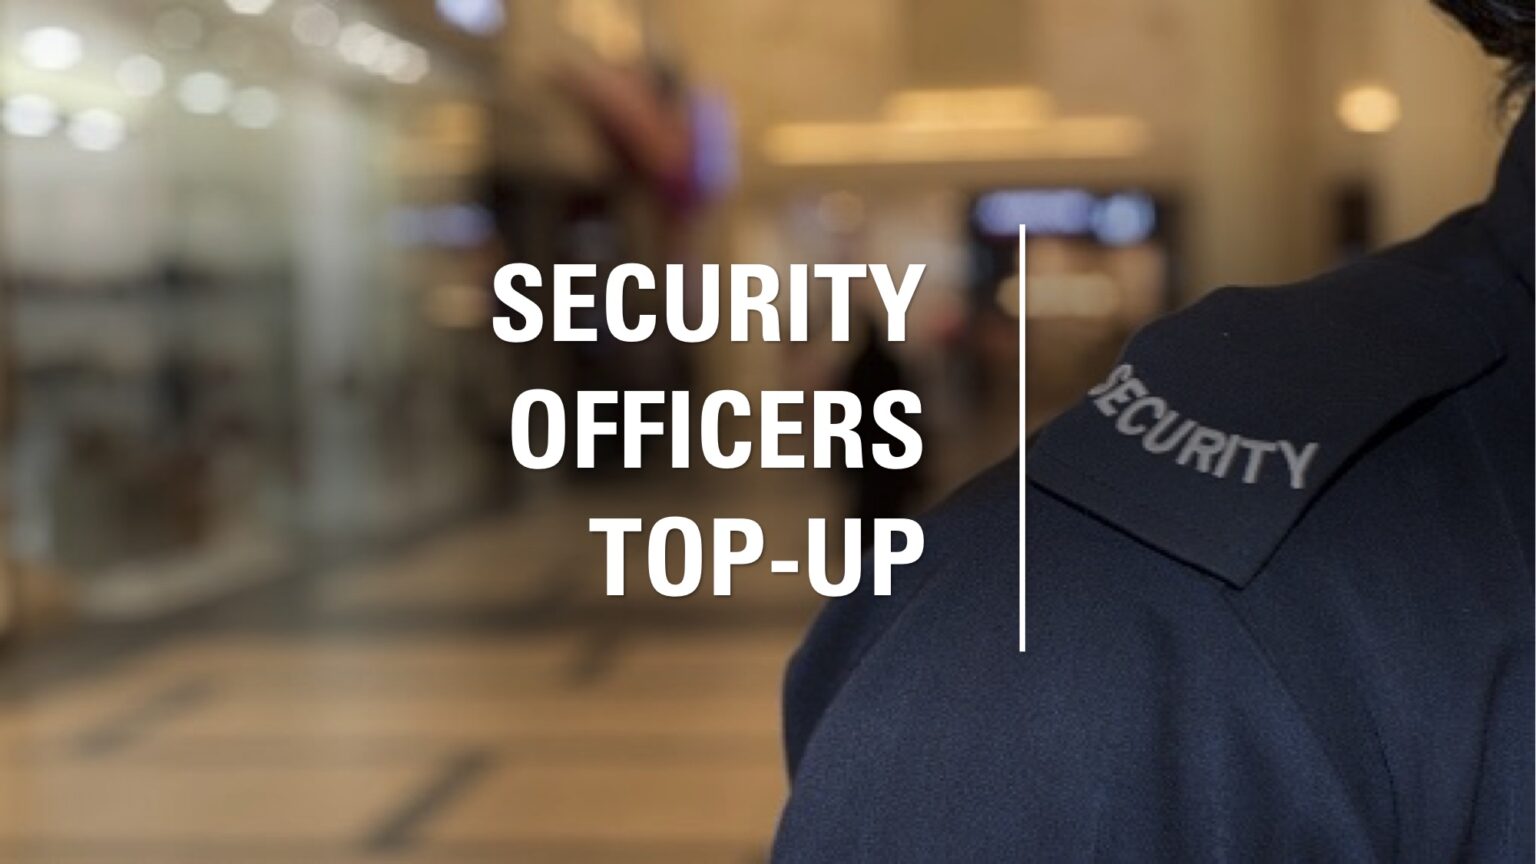 Security Officers Top-up Training course